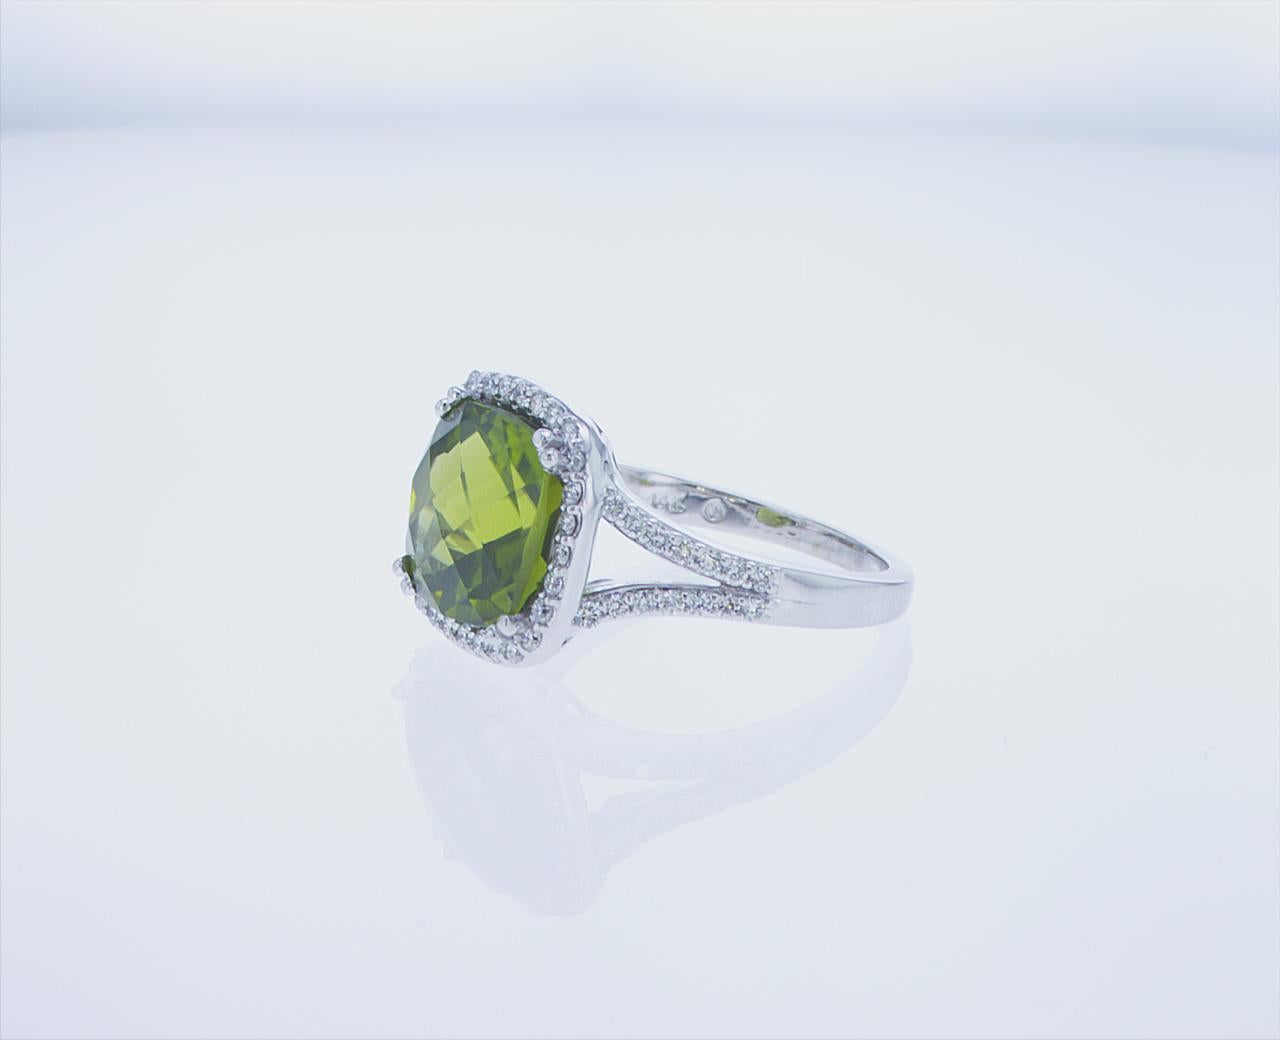 5.18ct Cushion Shape Peridot Cocktail Ring in 14k White Gold For Sale 1